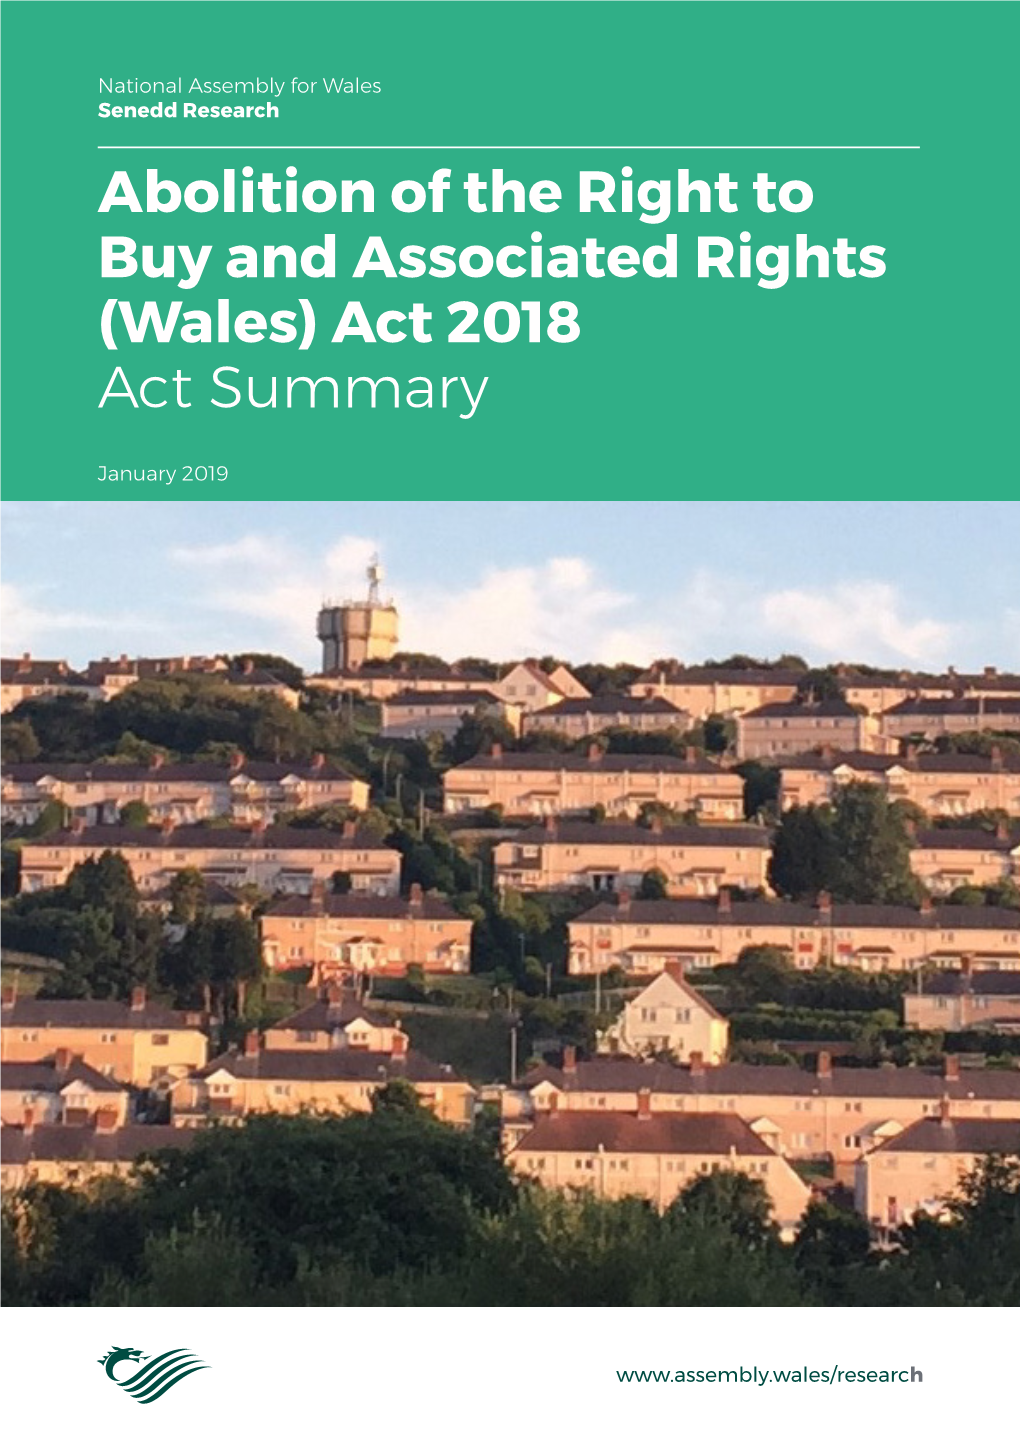 Abolition of the Right to Buy and Associated Rights (Wales) Act 2018 Act Summary